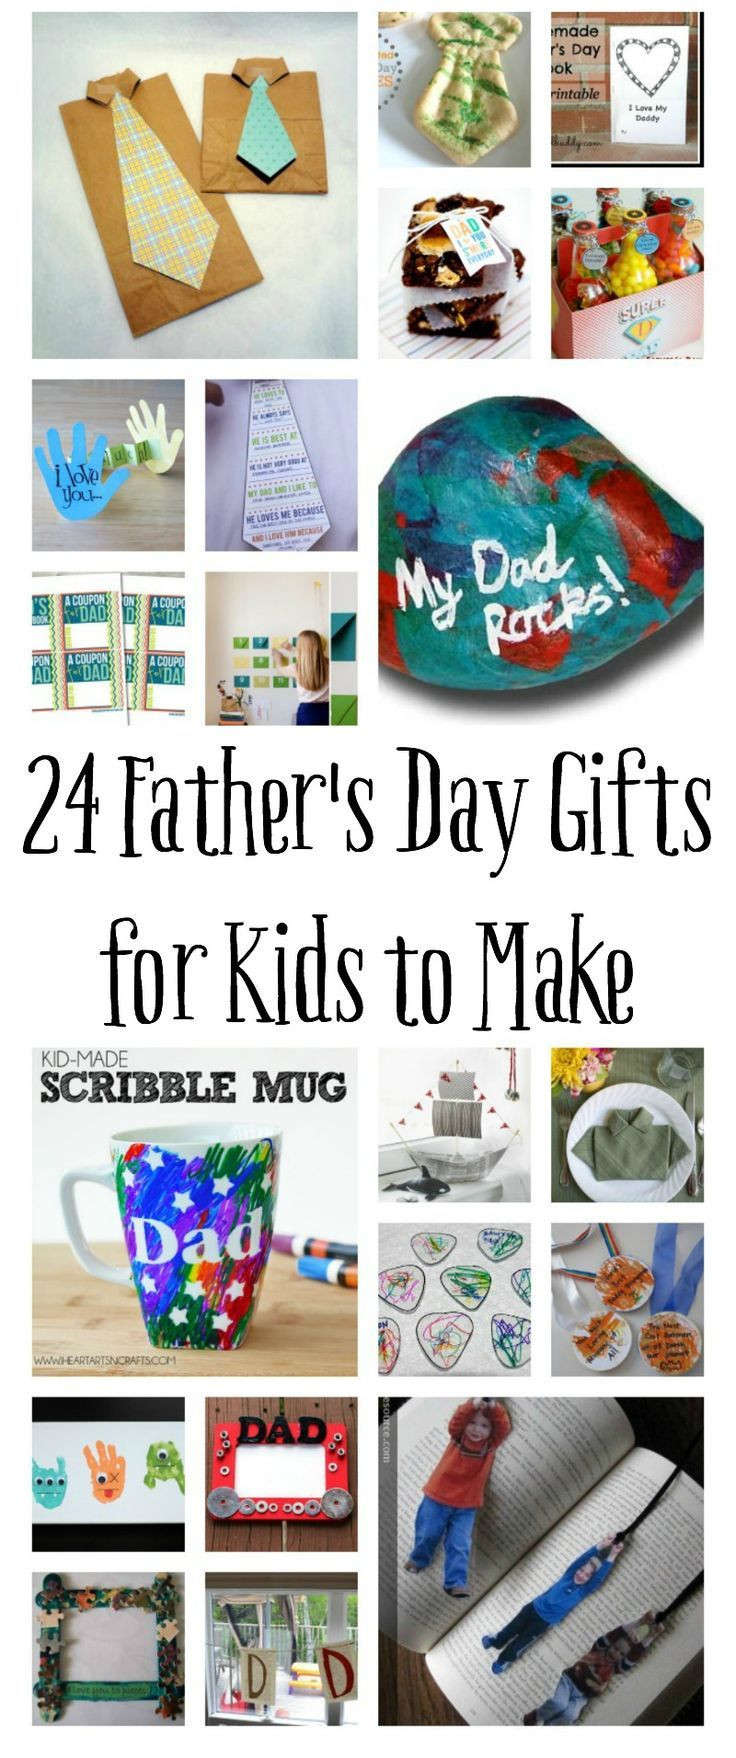 Homemade Gifts For Dad From Kids
 100 Homemade Father s Day Gifts for Kids to Make